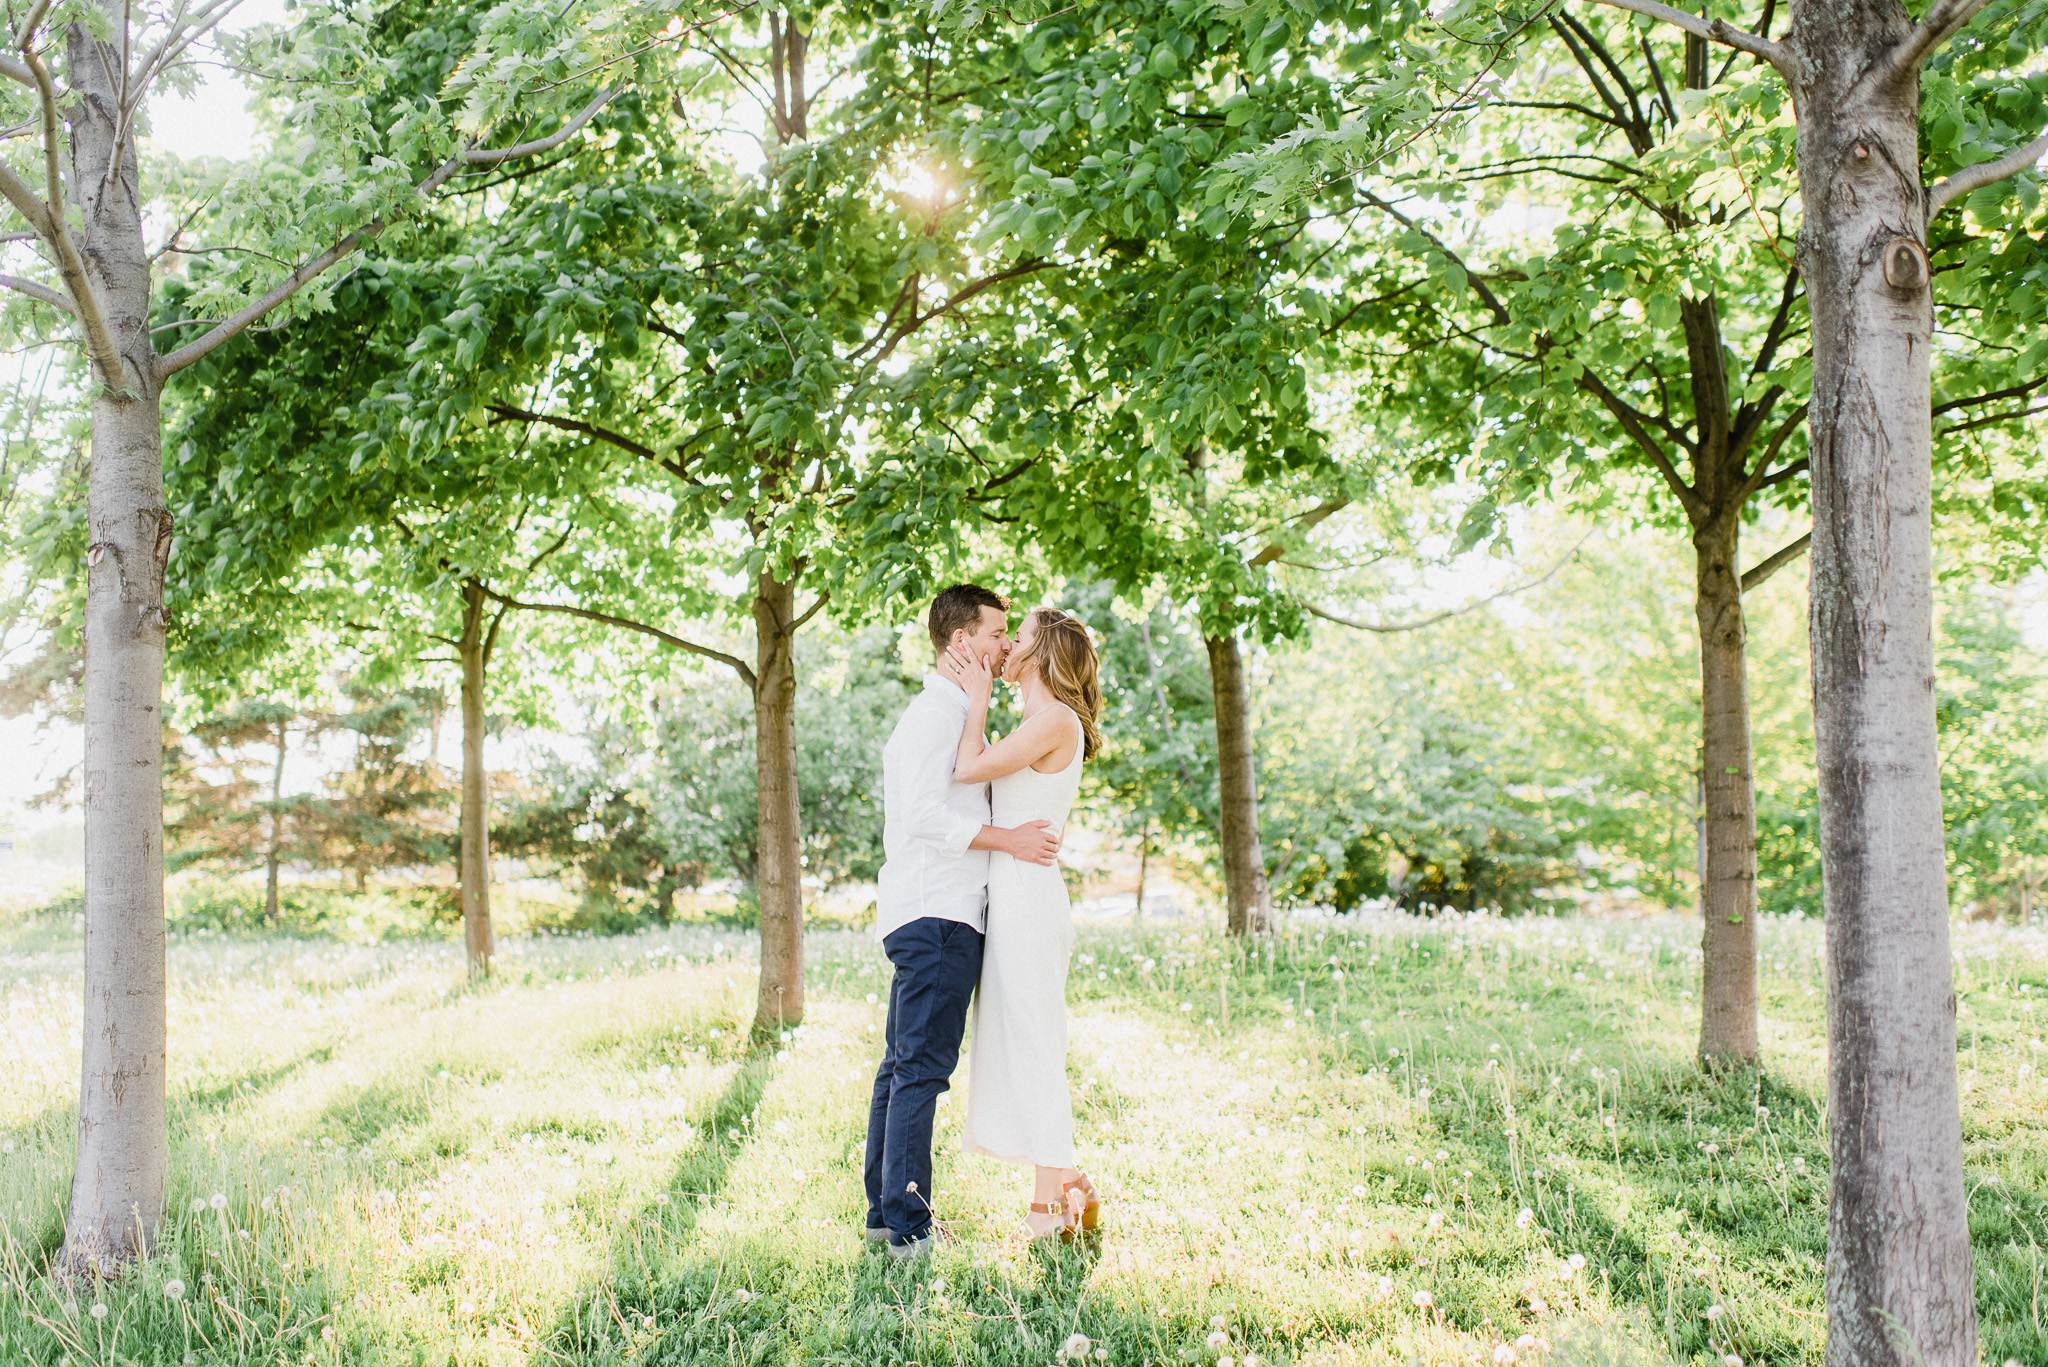 Gorgeous bride-to-be in elegant white jumpsuit, photographed by Jenn Kavanagh Photography.